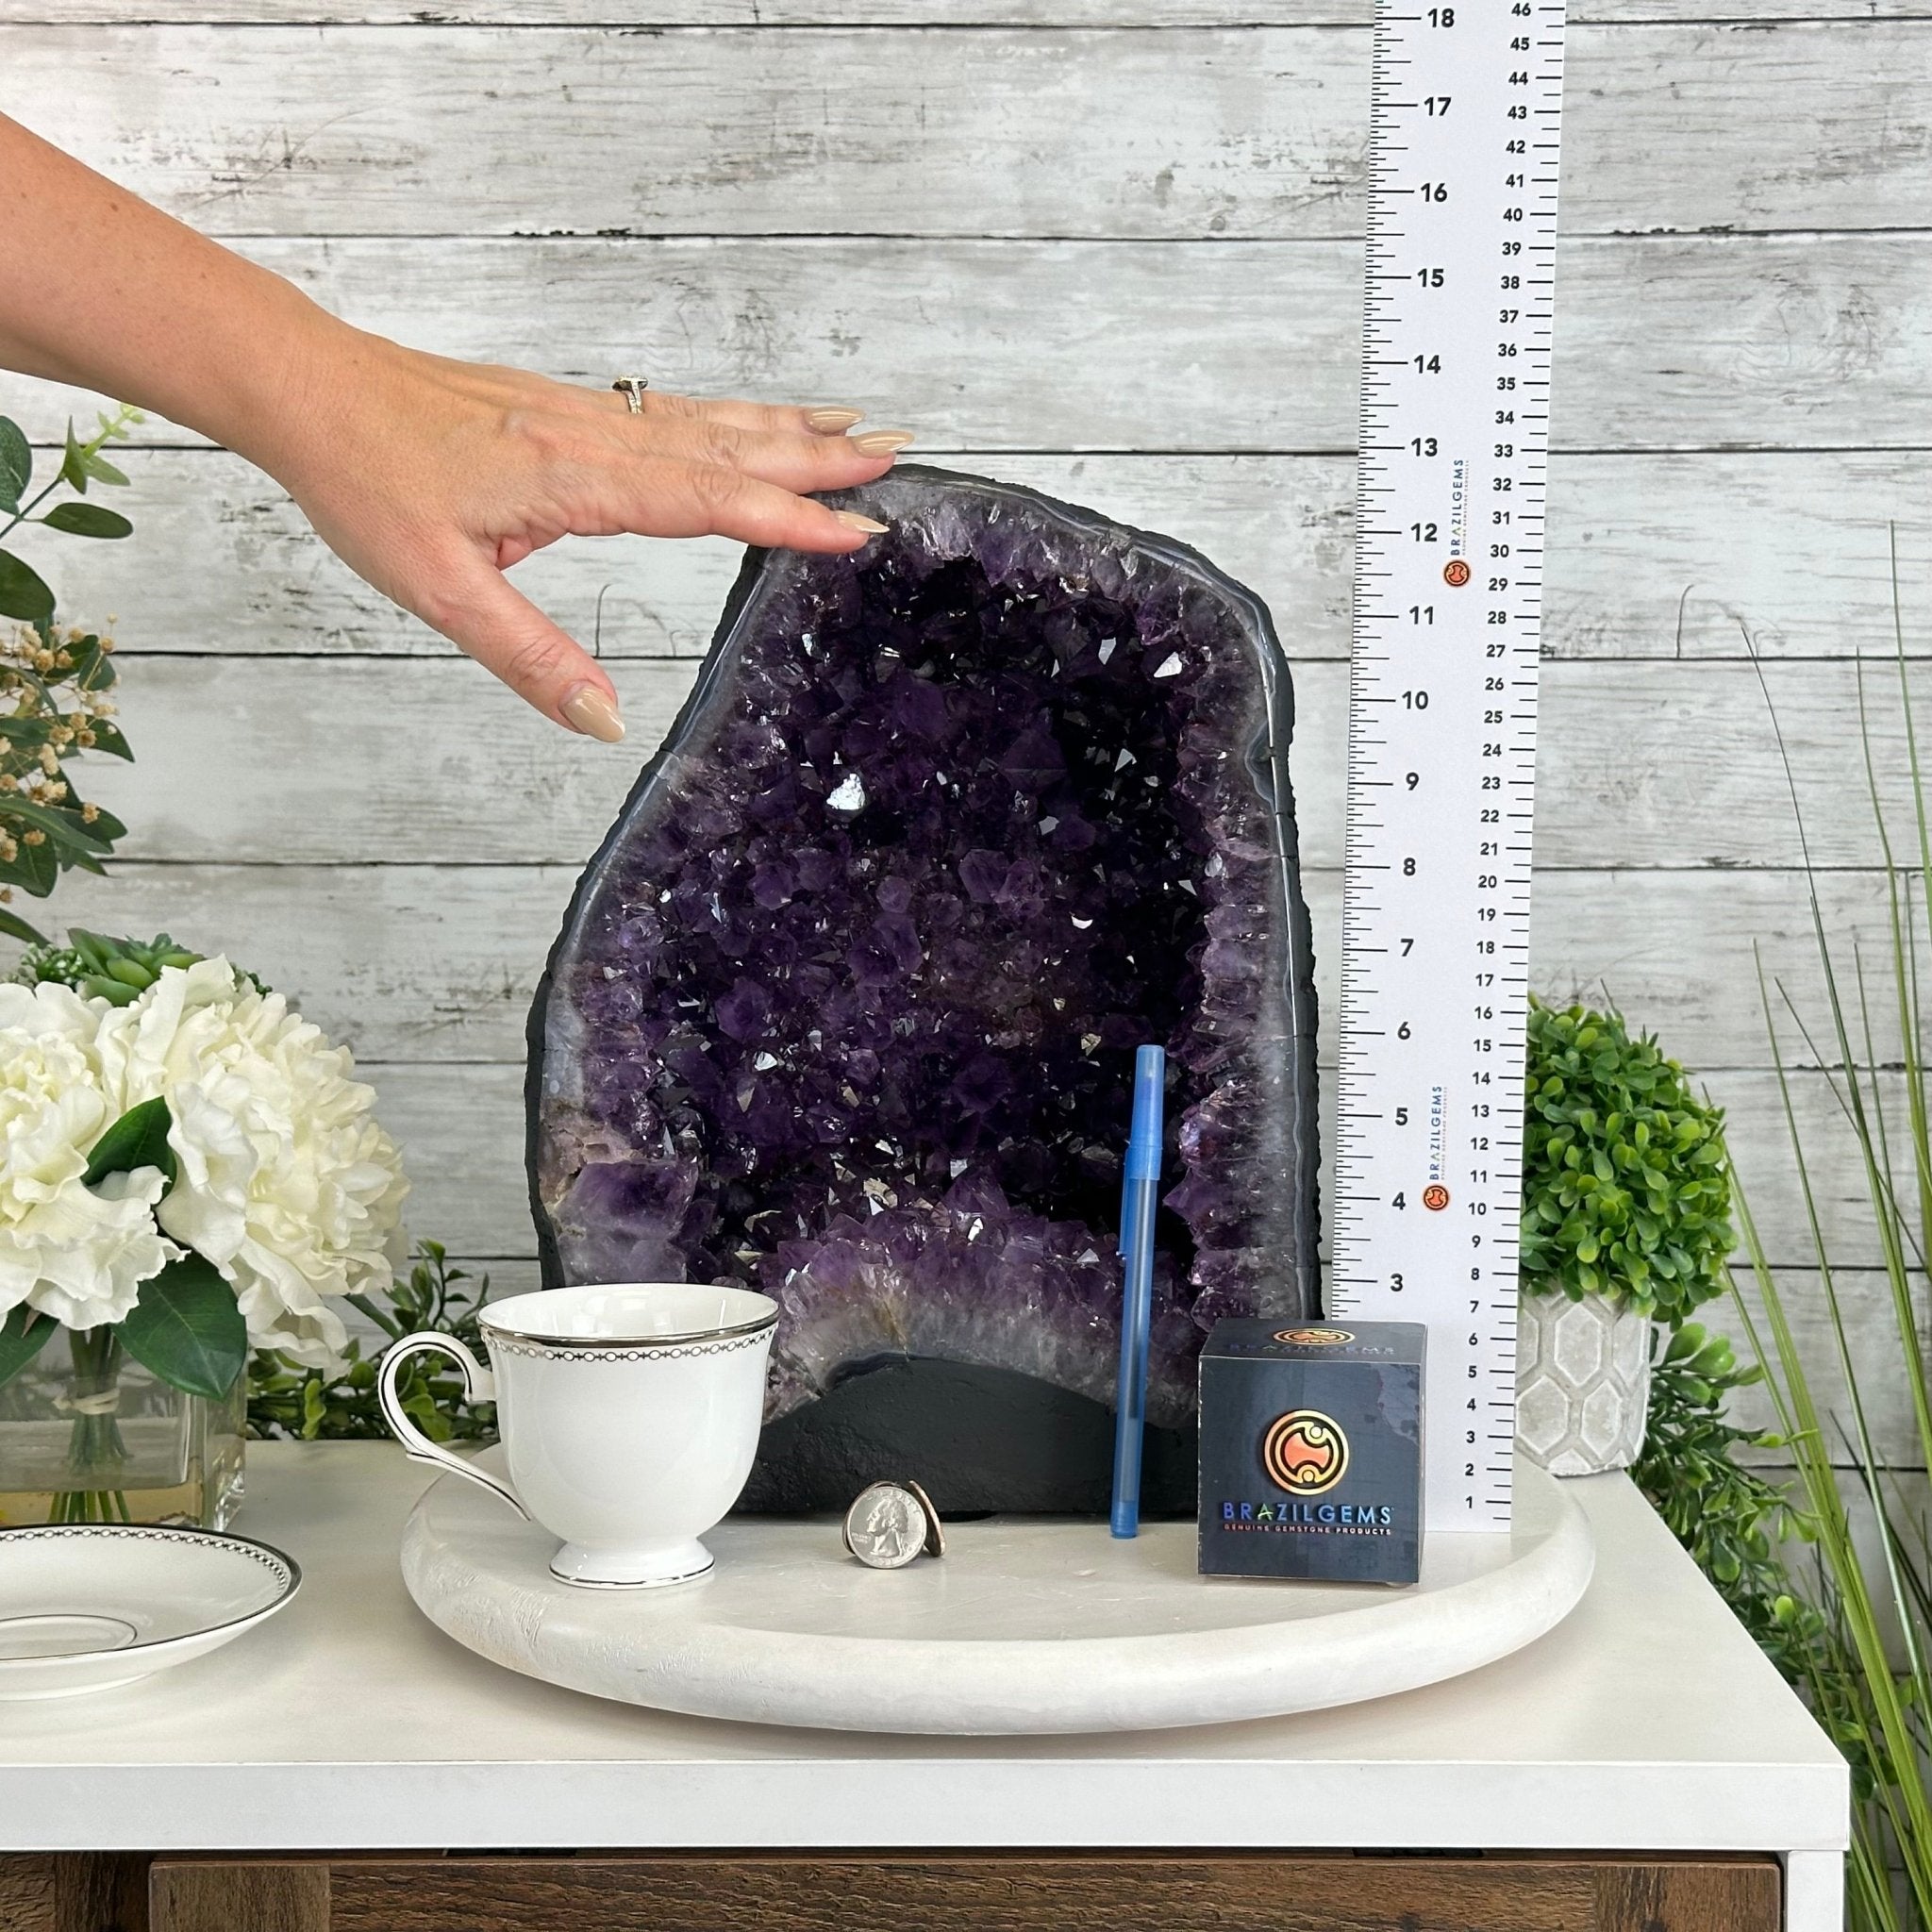 Quality Brazilian Amethyst Cathedral, 30.6 lbs & 12.9" Tall, #5601 - 1406 - Brazil GemsBrazil GemsQuality Brazilian Amethyst Cathedral, 30.6 lbs & 12.9" Tall, #5601 - 1406Cathedrals5601 - 1406